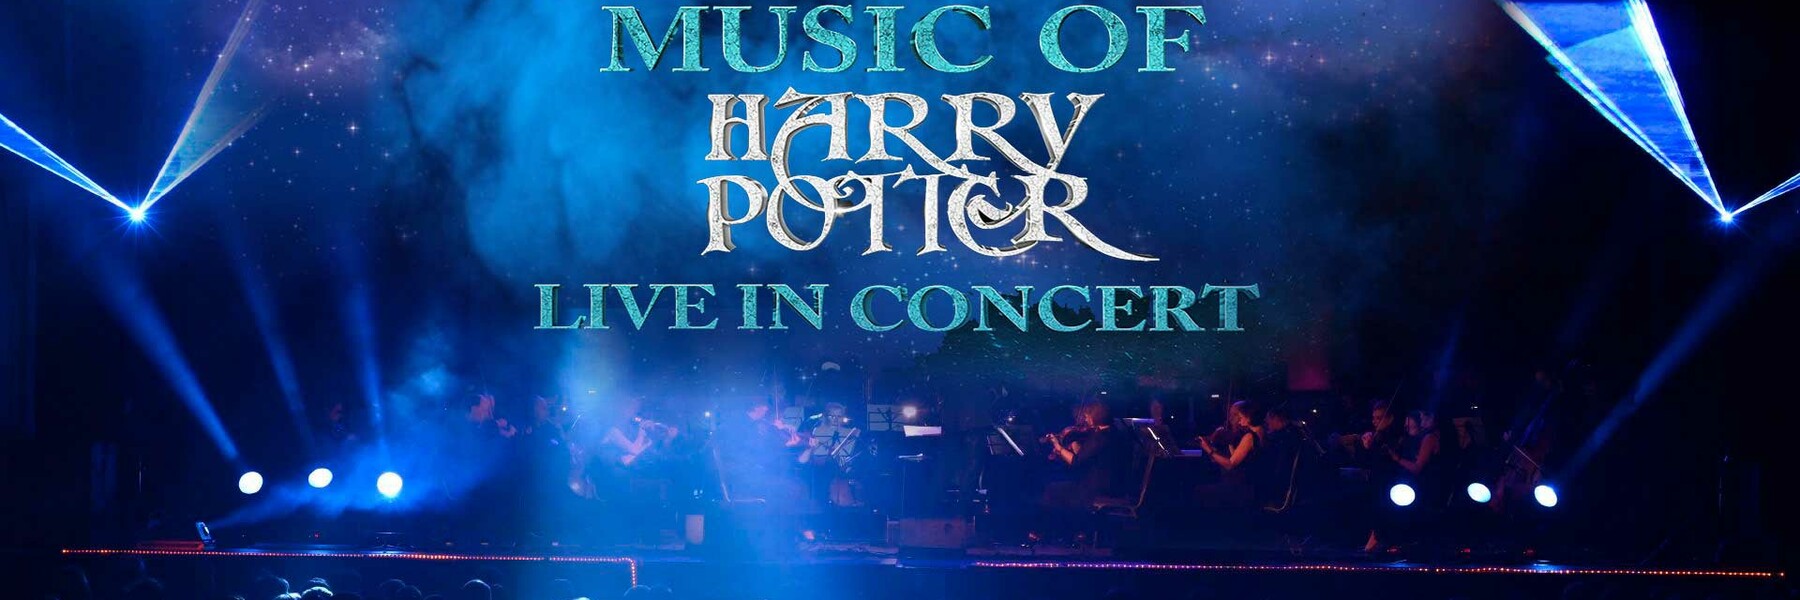 The Magical Music of Harry Potter Live in Concert THE HALL Zürich